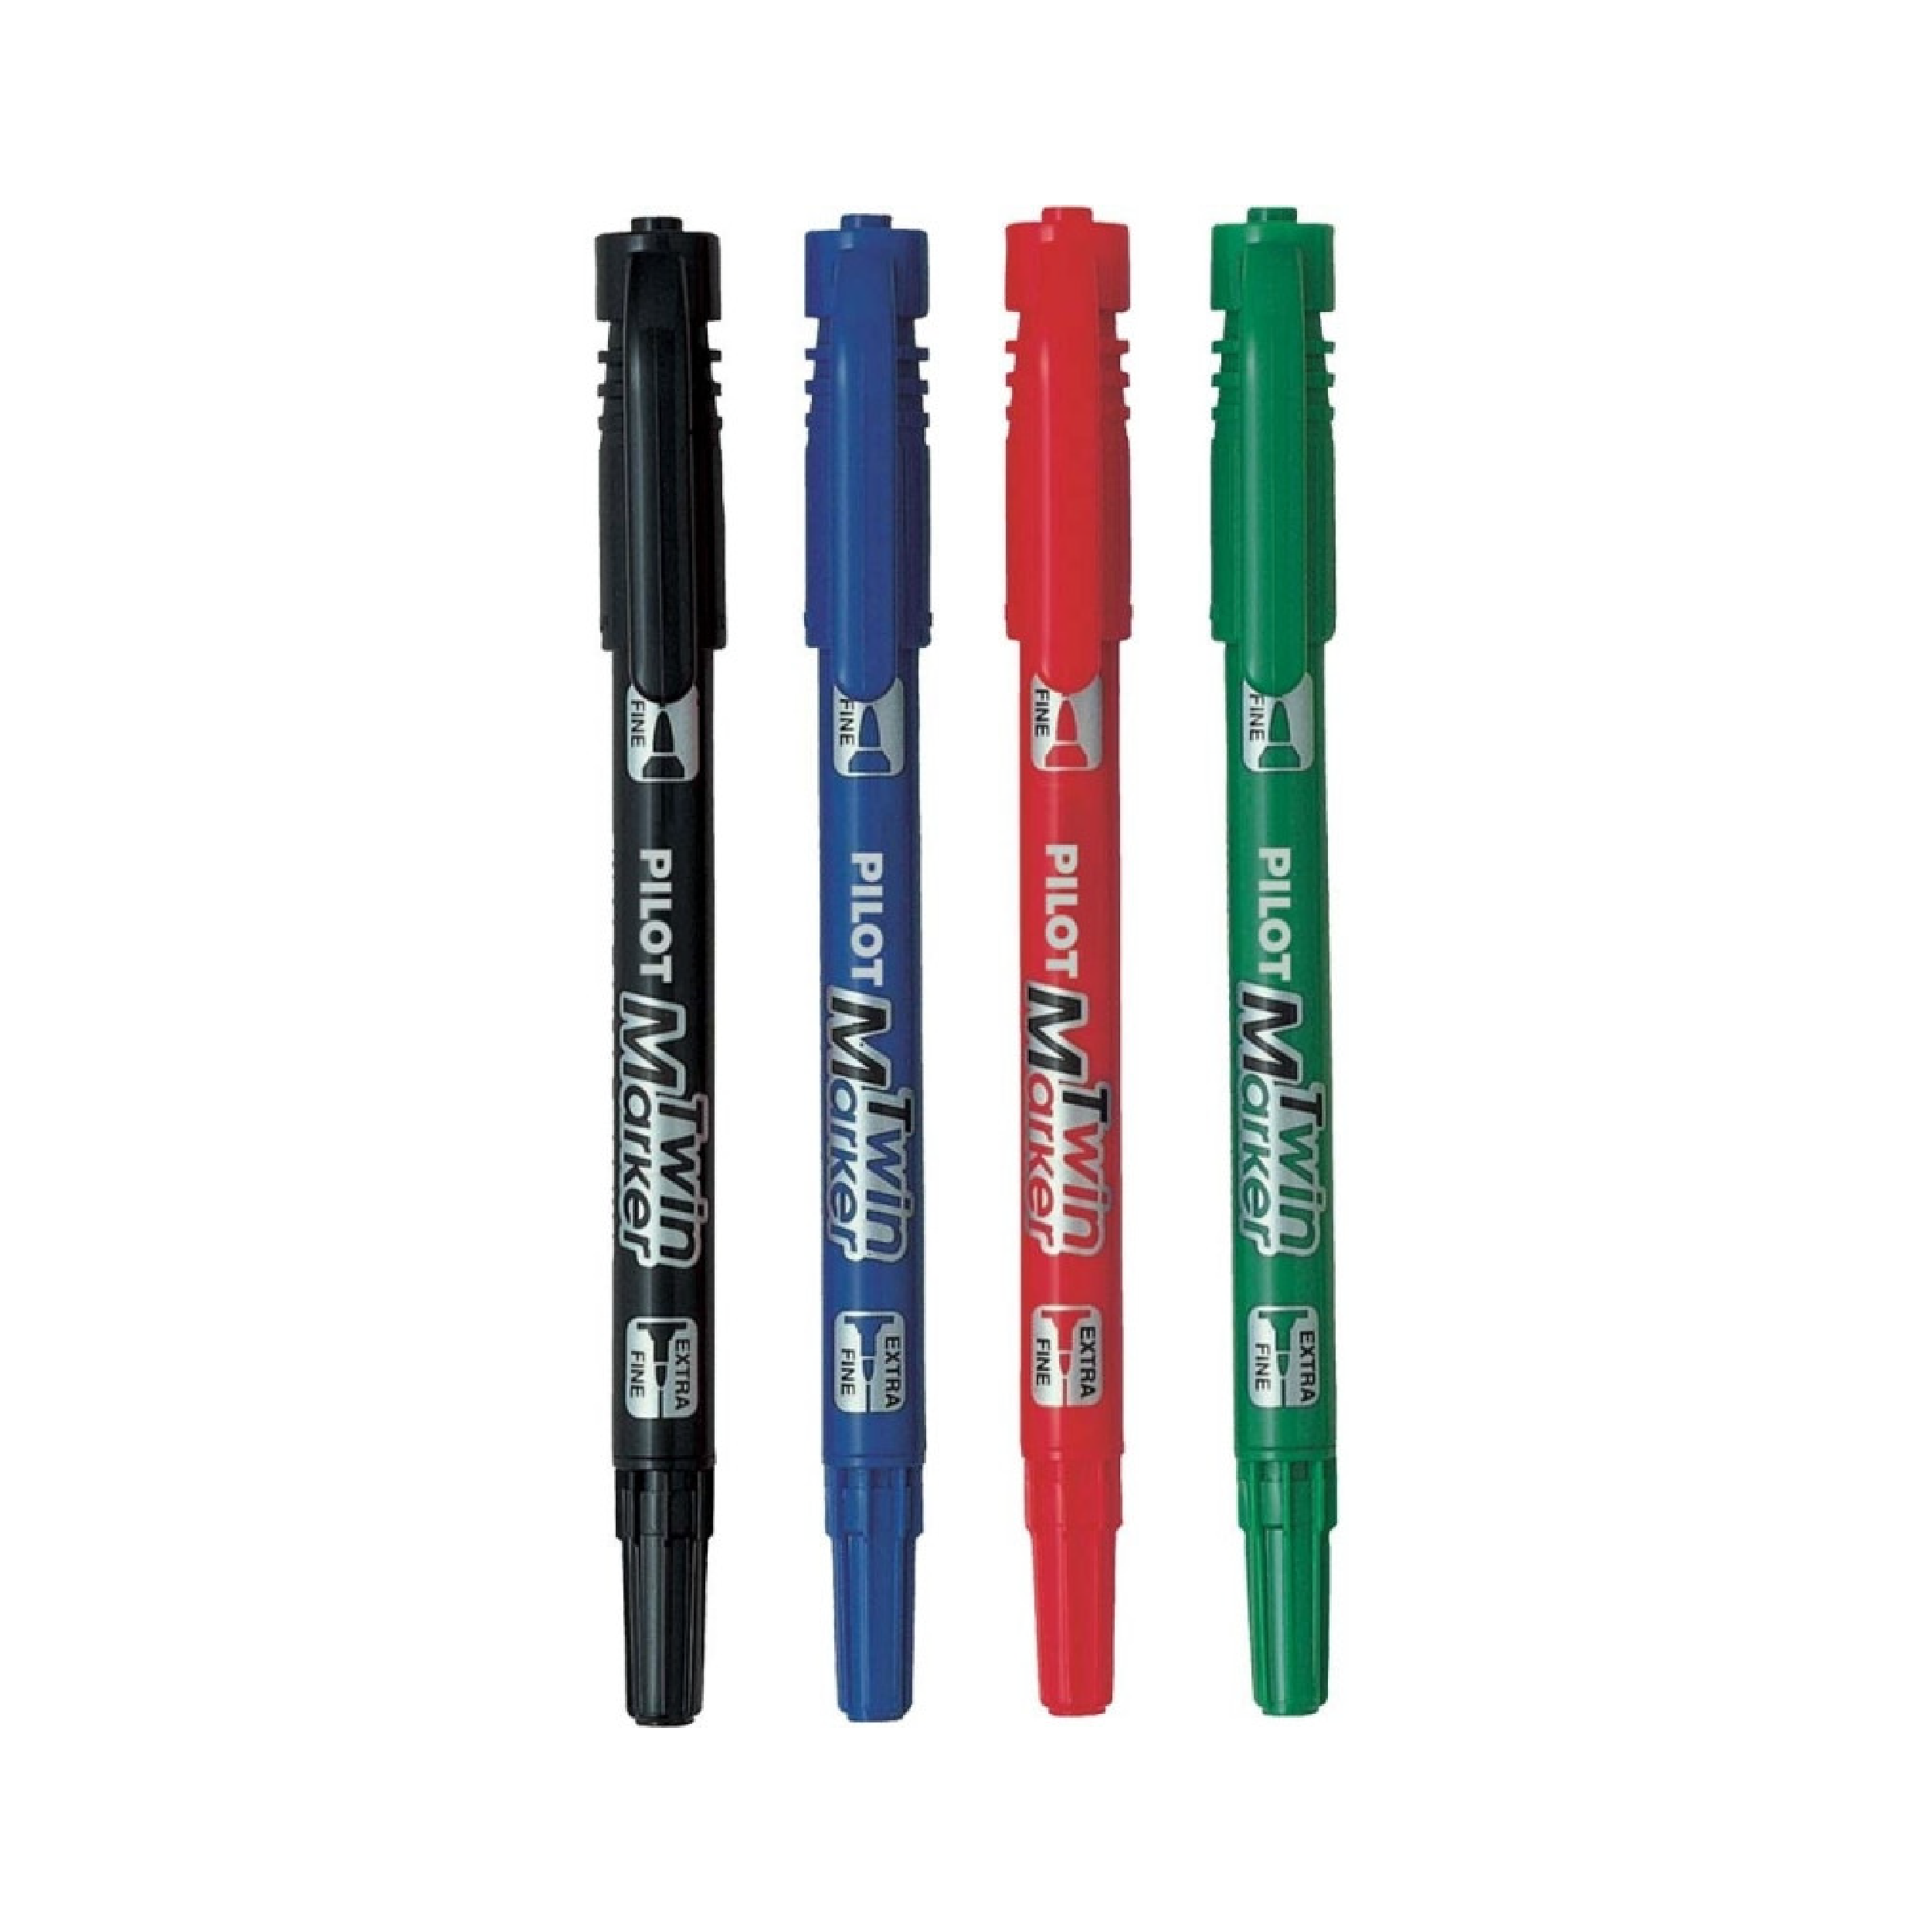 Pilot Twin Marker, Extra Fine and Fine Point (SCA-TM)